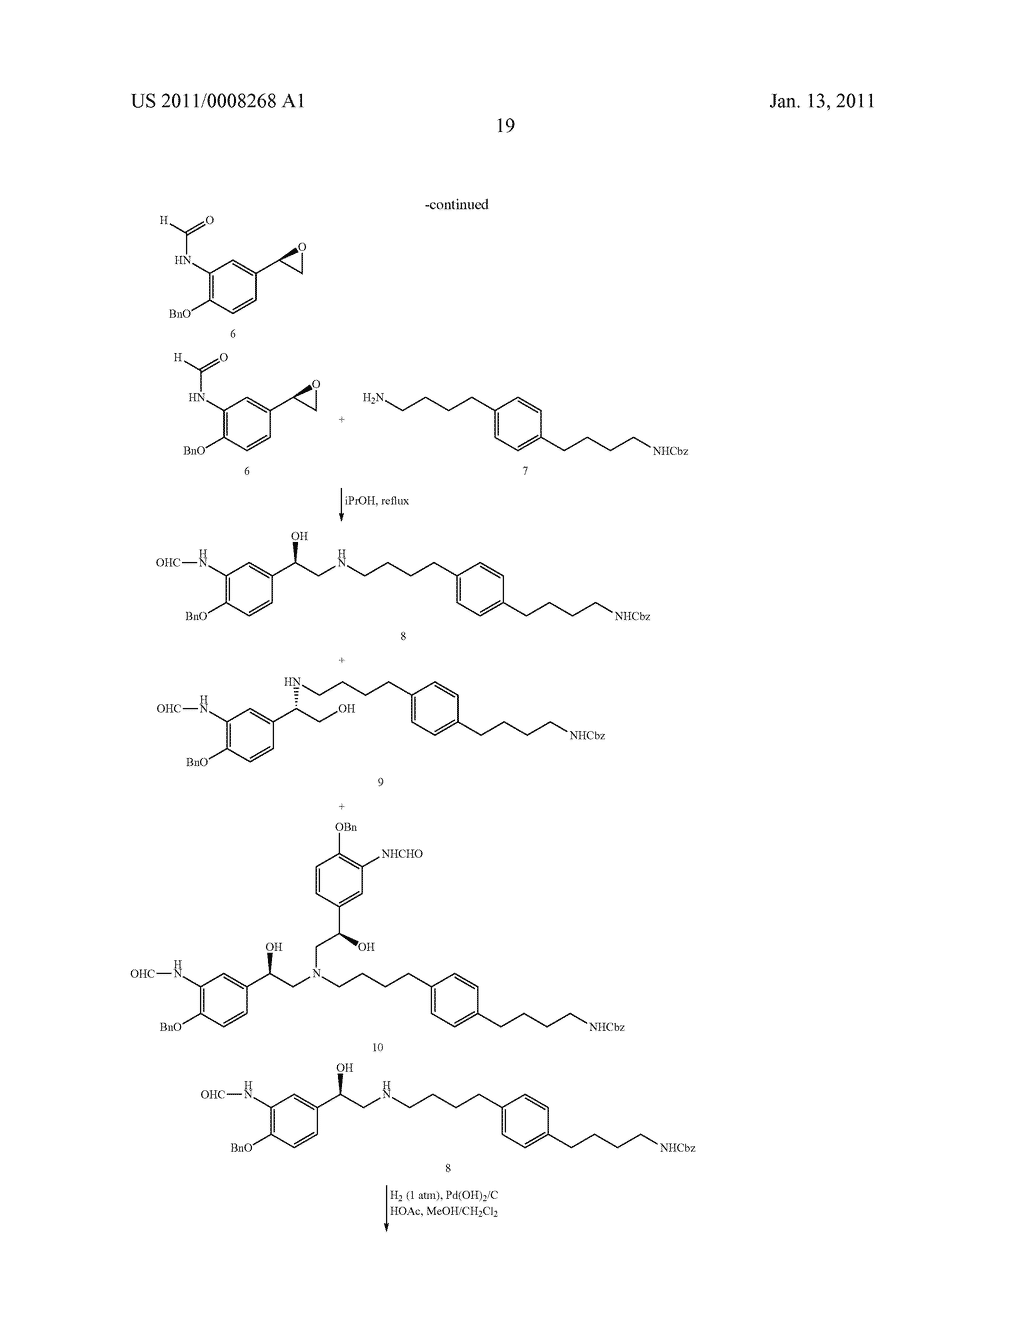 PHENYL SUBSTITUTED PYRAZINOYLGUANIDINE SODIUM CHANNEL BLOCKERS POSSESSING BETA AGONIST ACTIVITY - diagram, schematic, and image 24